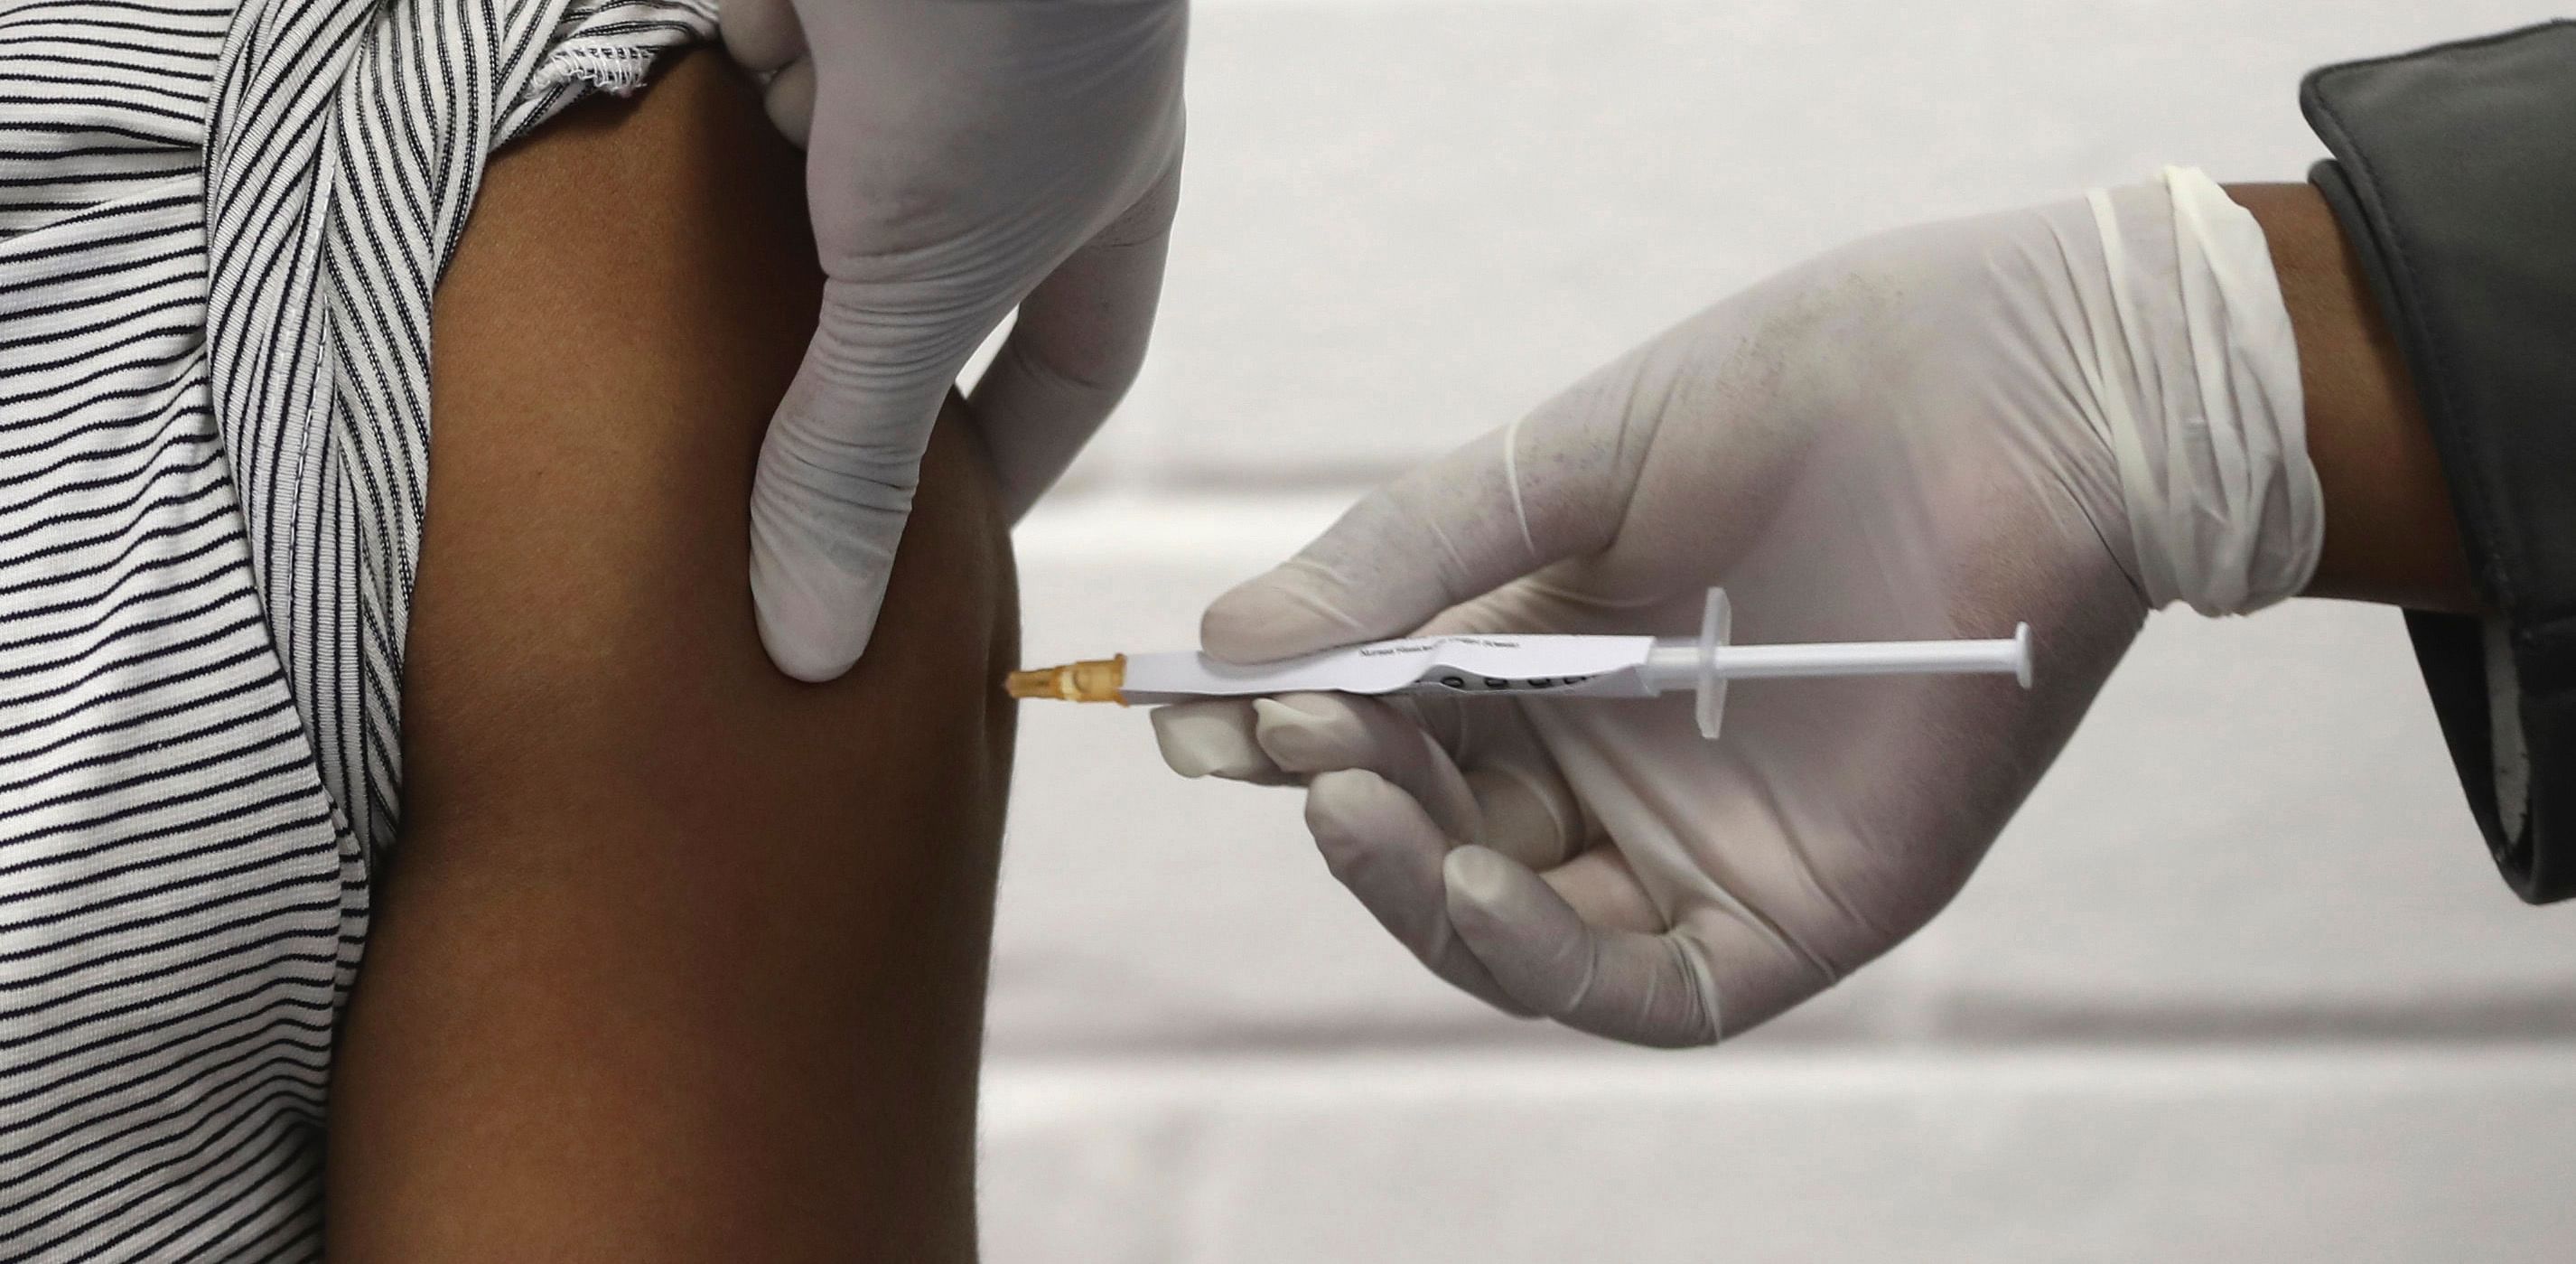 The vaccine race has taken on vital importance as countries look to more definitively re-open their economies and stem a pandemic that has sickened more than 59 million. Inoculations are seen as the best hope as a fresh wave of infections is forcing nations to reintroduce lockdowns and other restrictions. Credit: AP